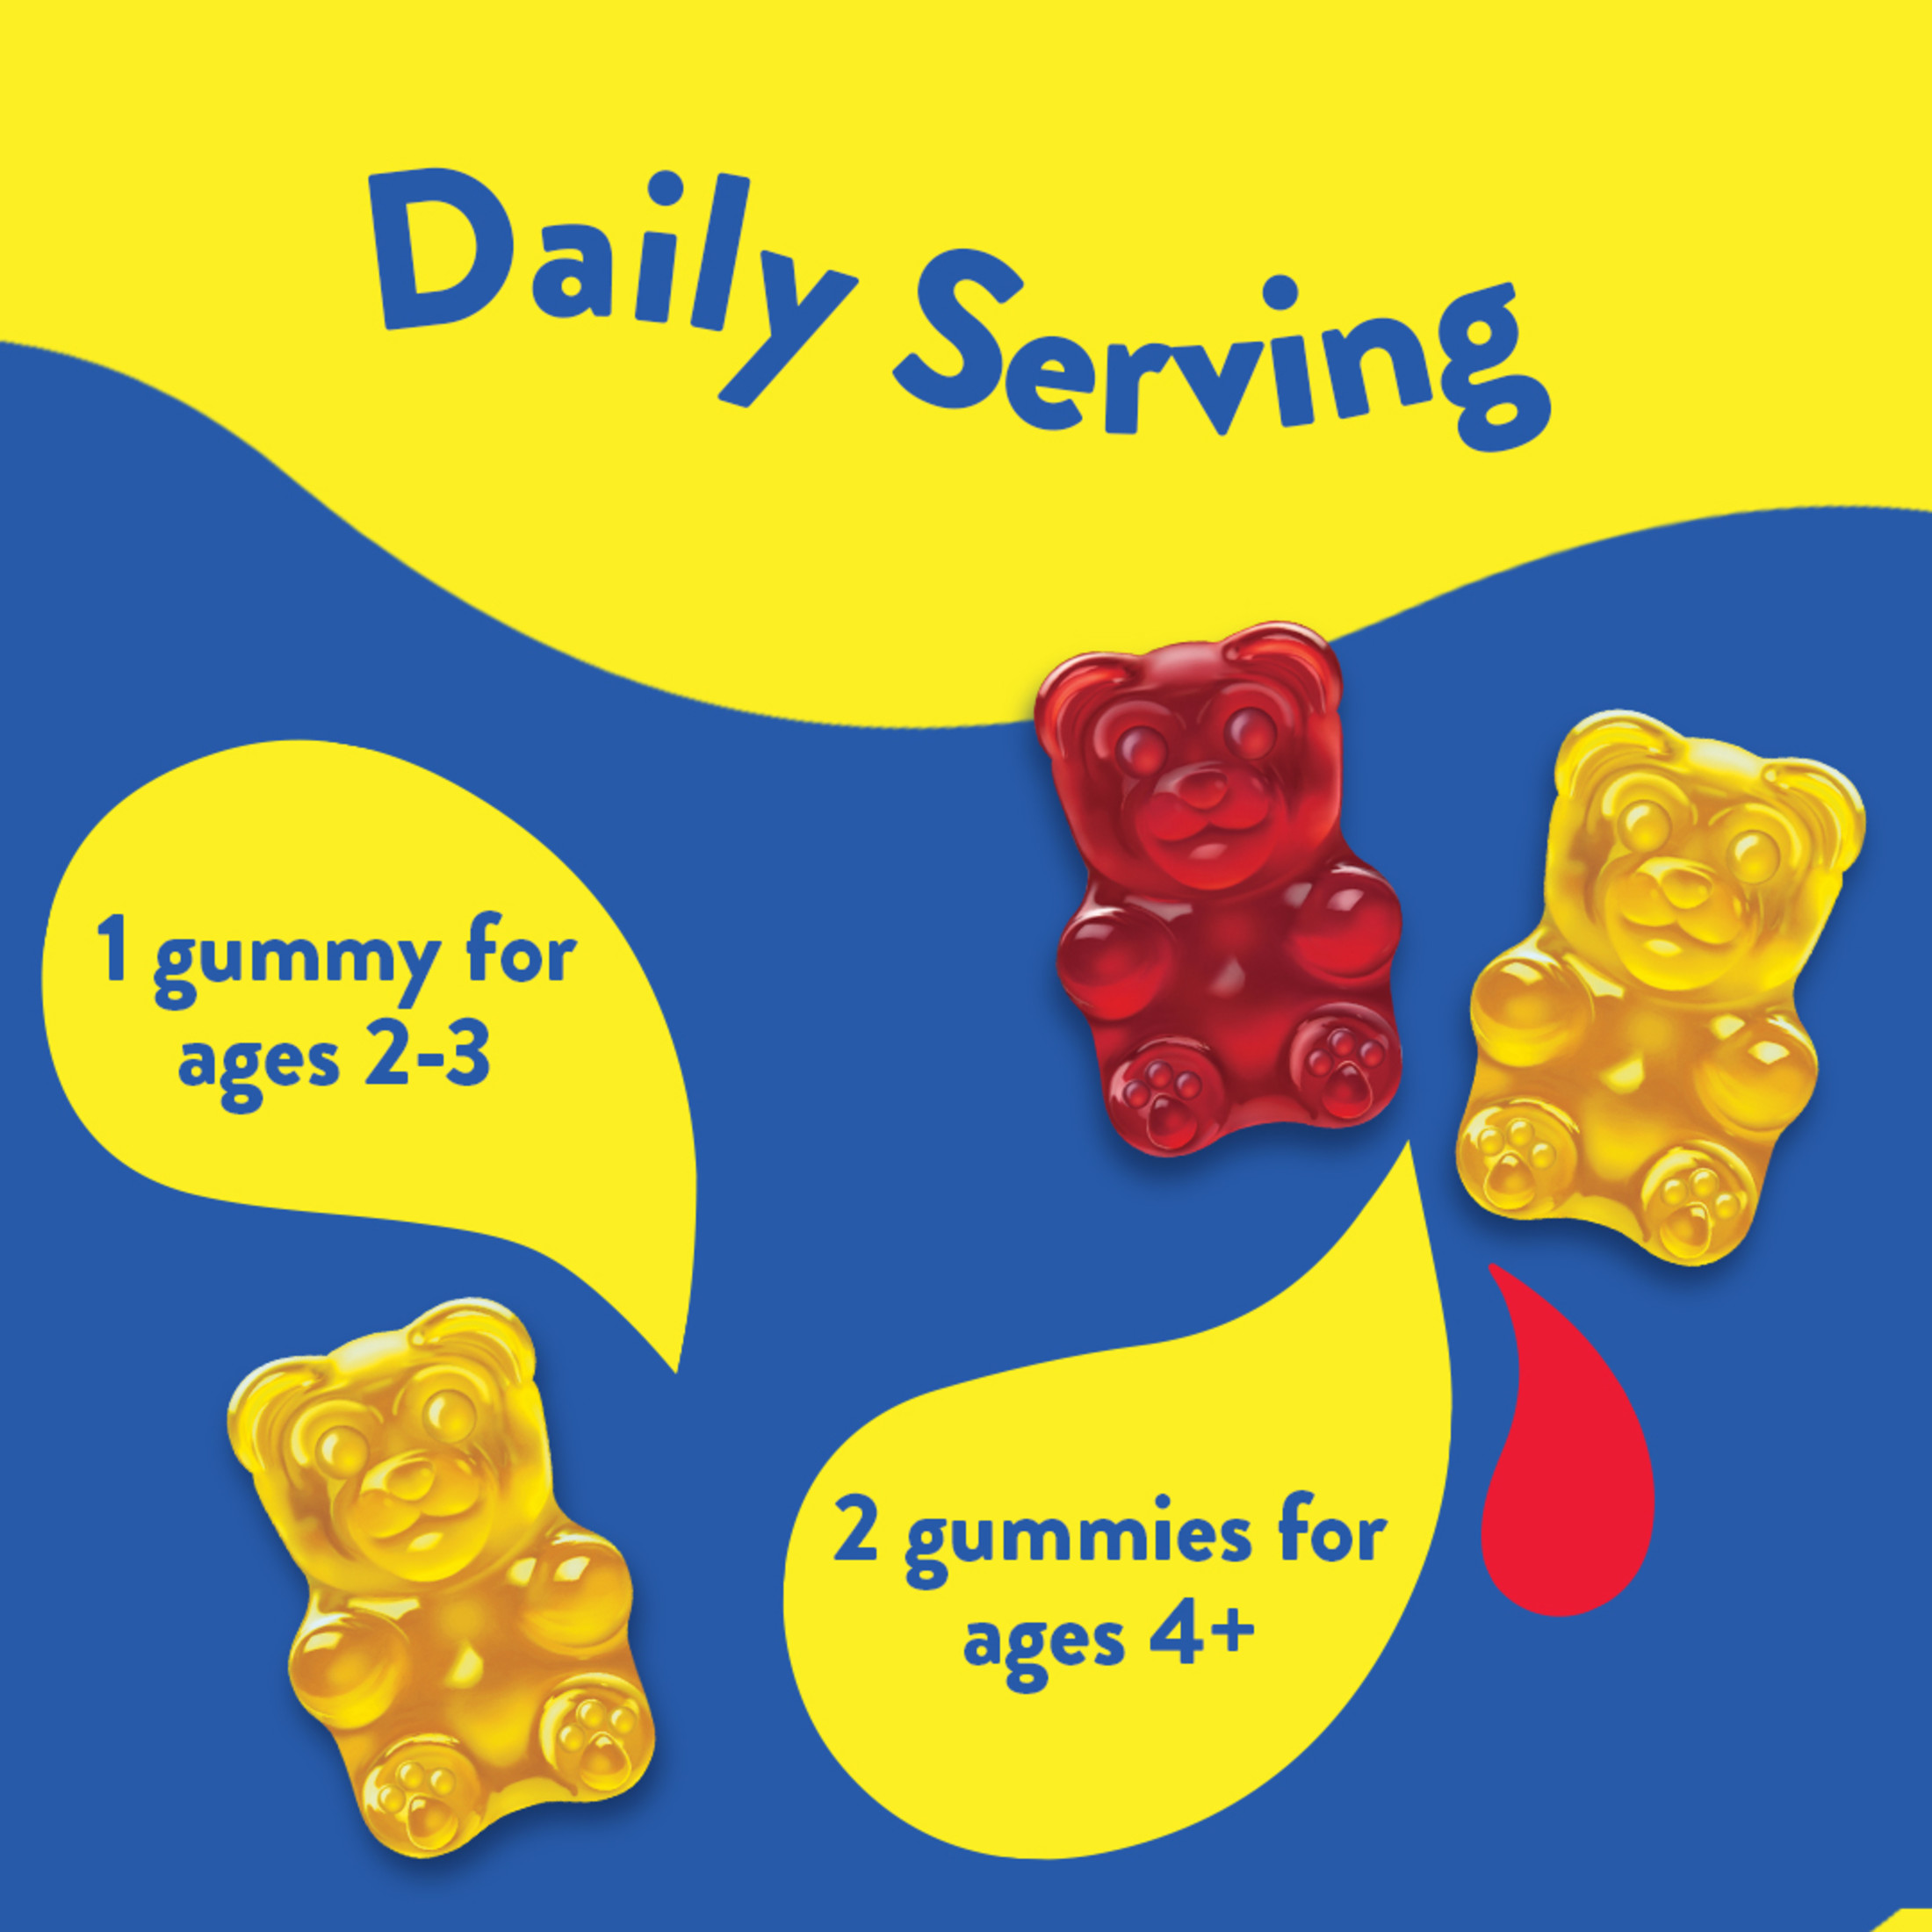 L’il Critters Gummy Vites Daily Gummy Multivitamin for Kids, Vitamin C, D3 for Immune Support Cherry, Strawberry, Orange, Pineapple and Blueberry Flavors, 70 count Gummies - image 5 of 9